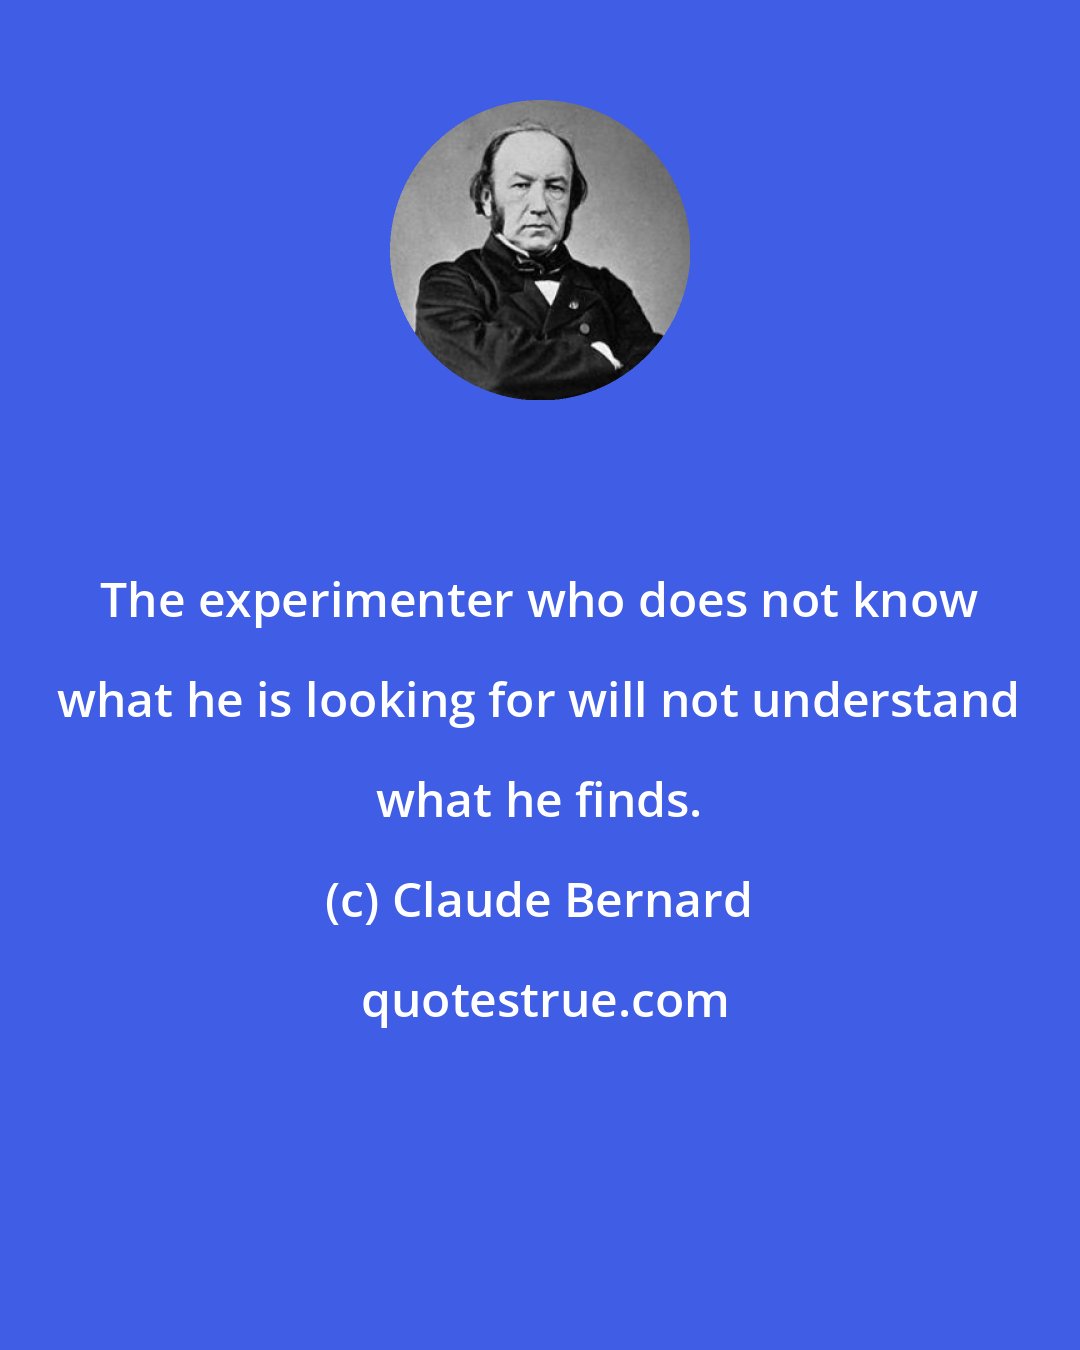 Claude Bernard: The experimenter who does not know what he is looking for will not understand what he finds.